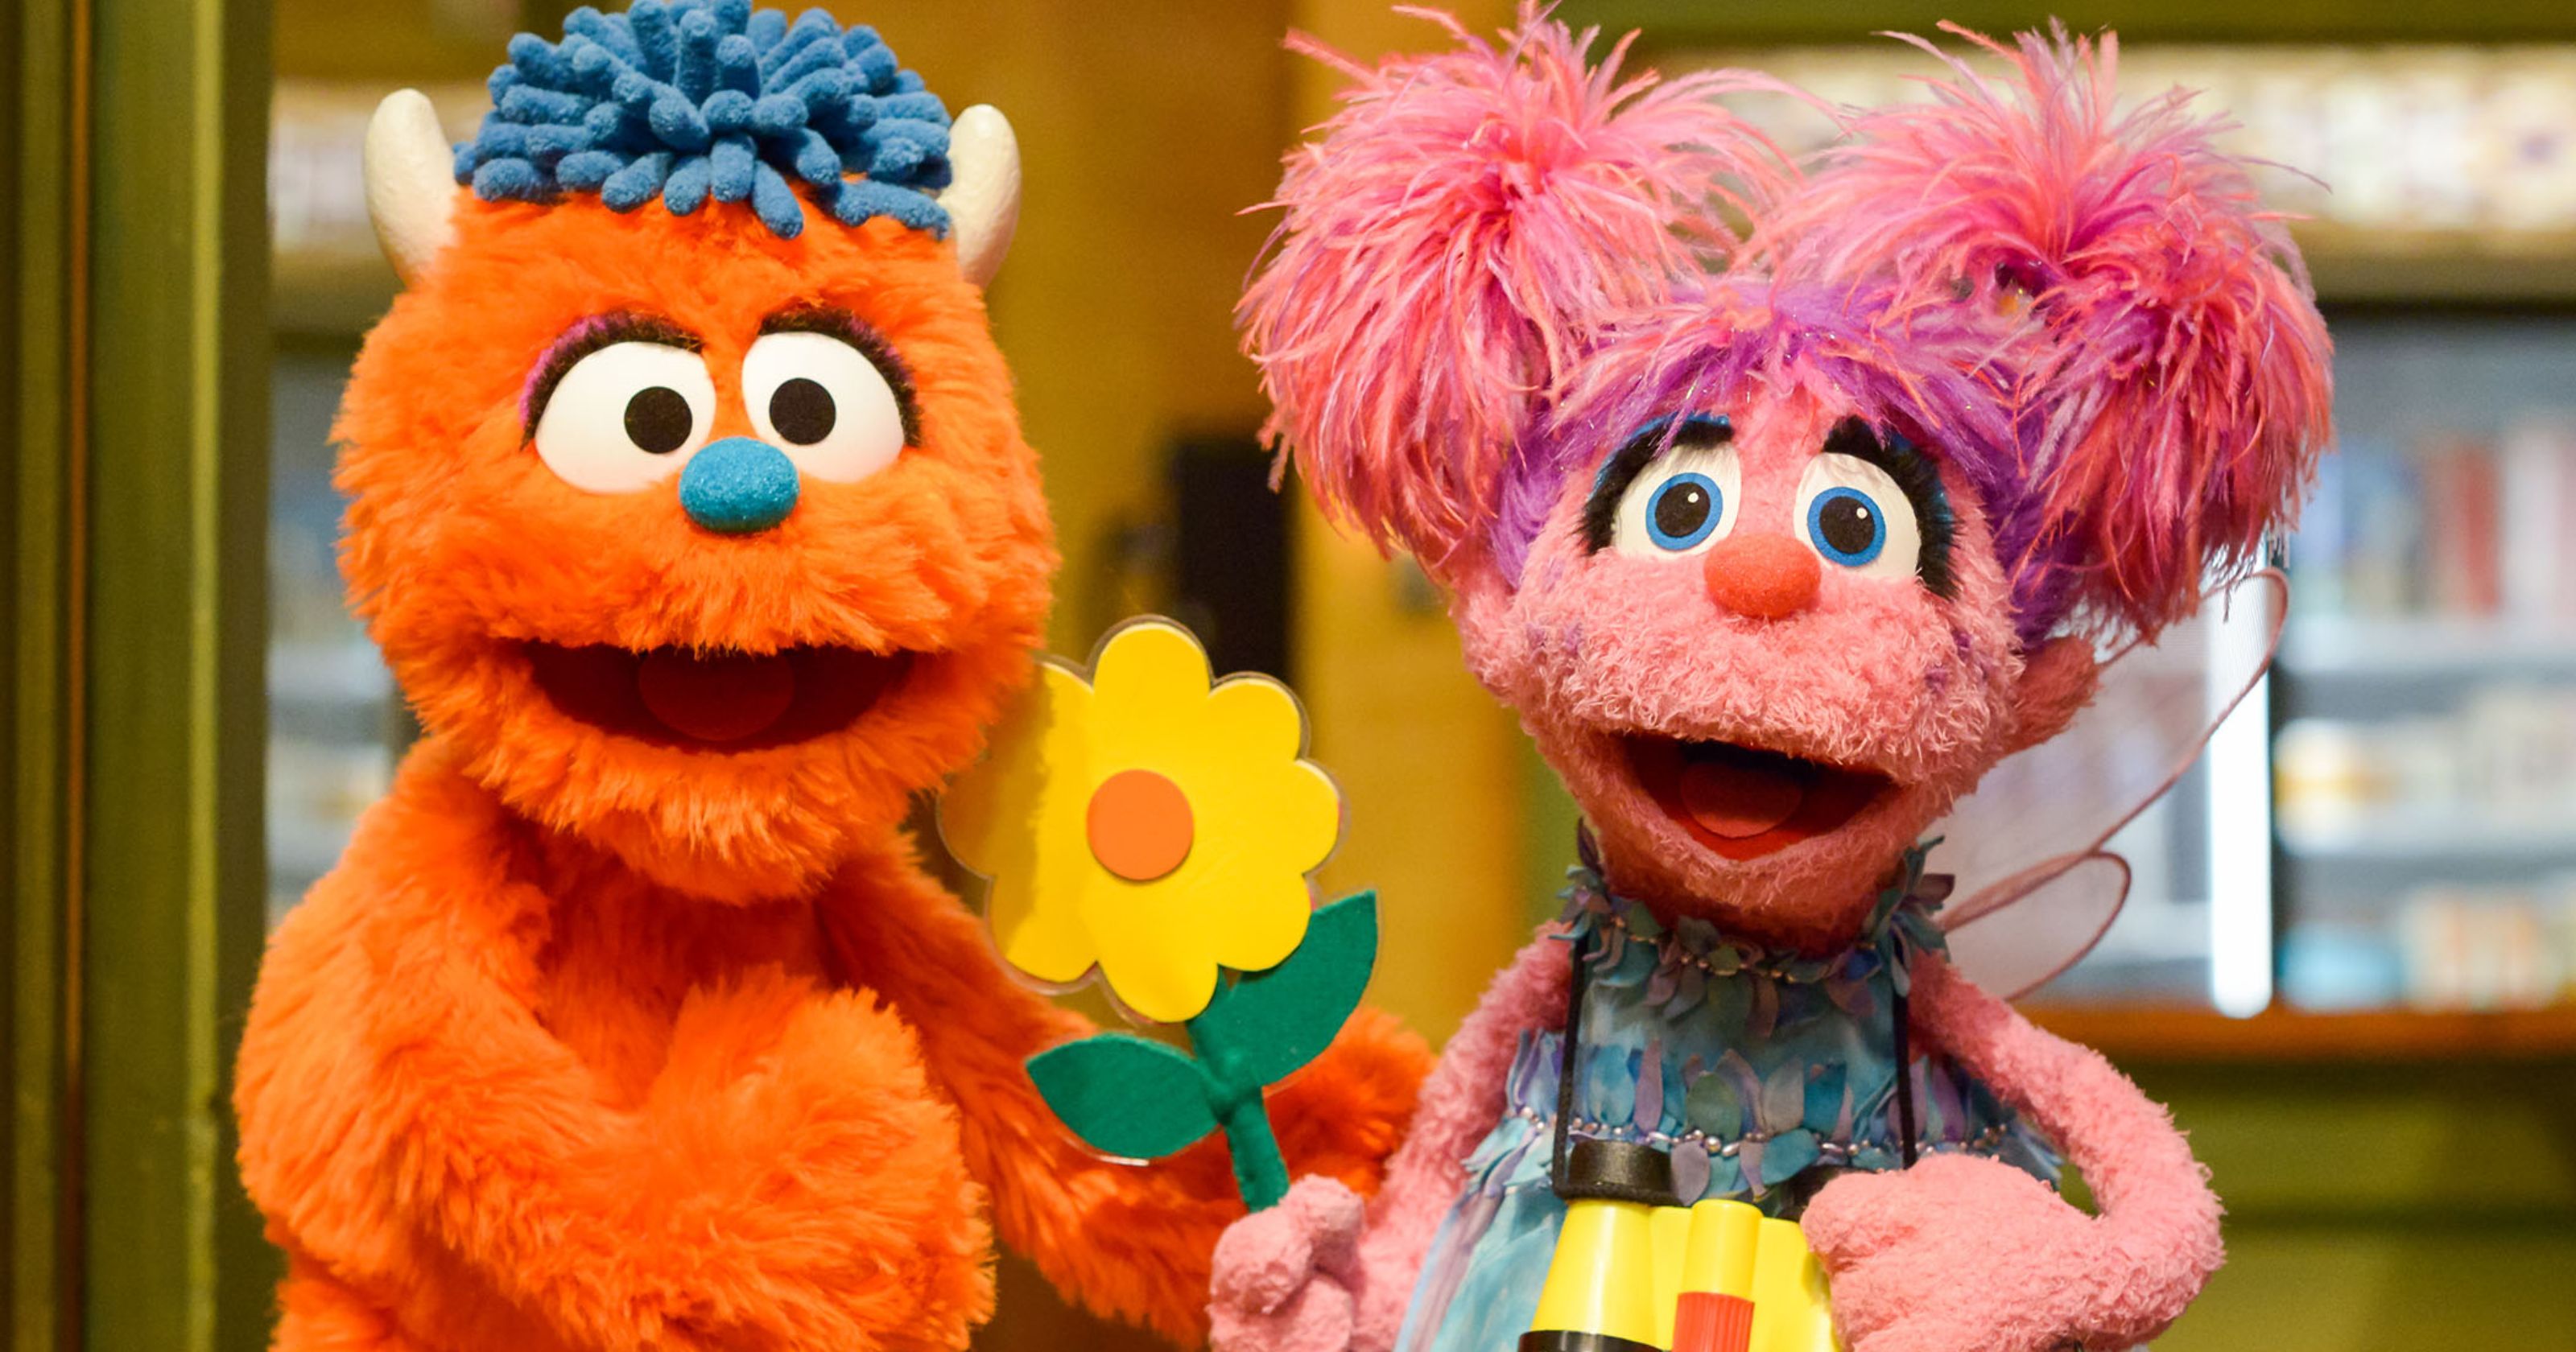 New 'Sesame Street' character Rudy celebrates blended families ...